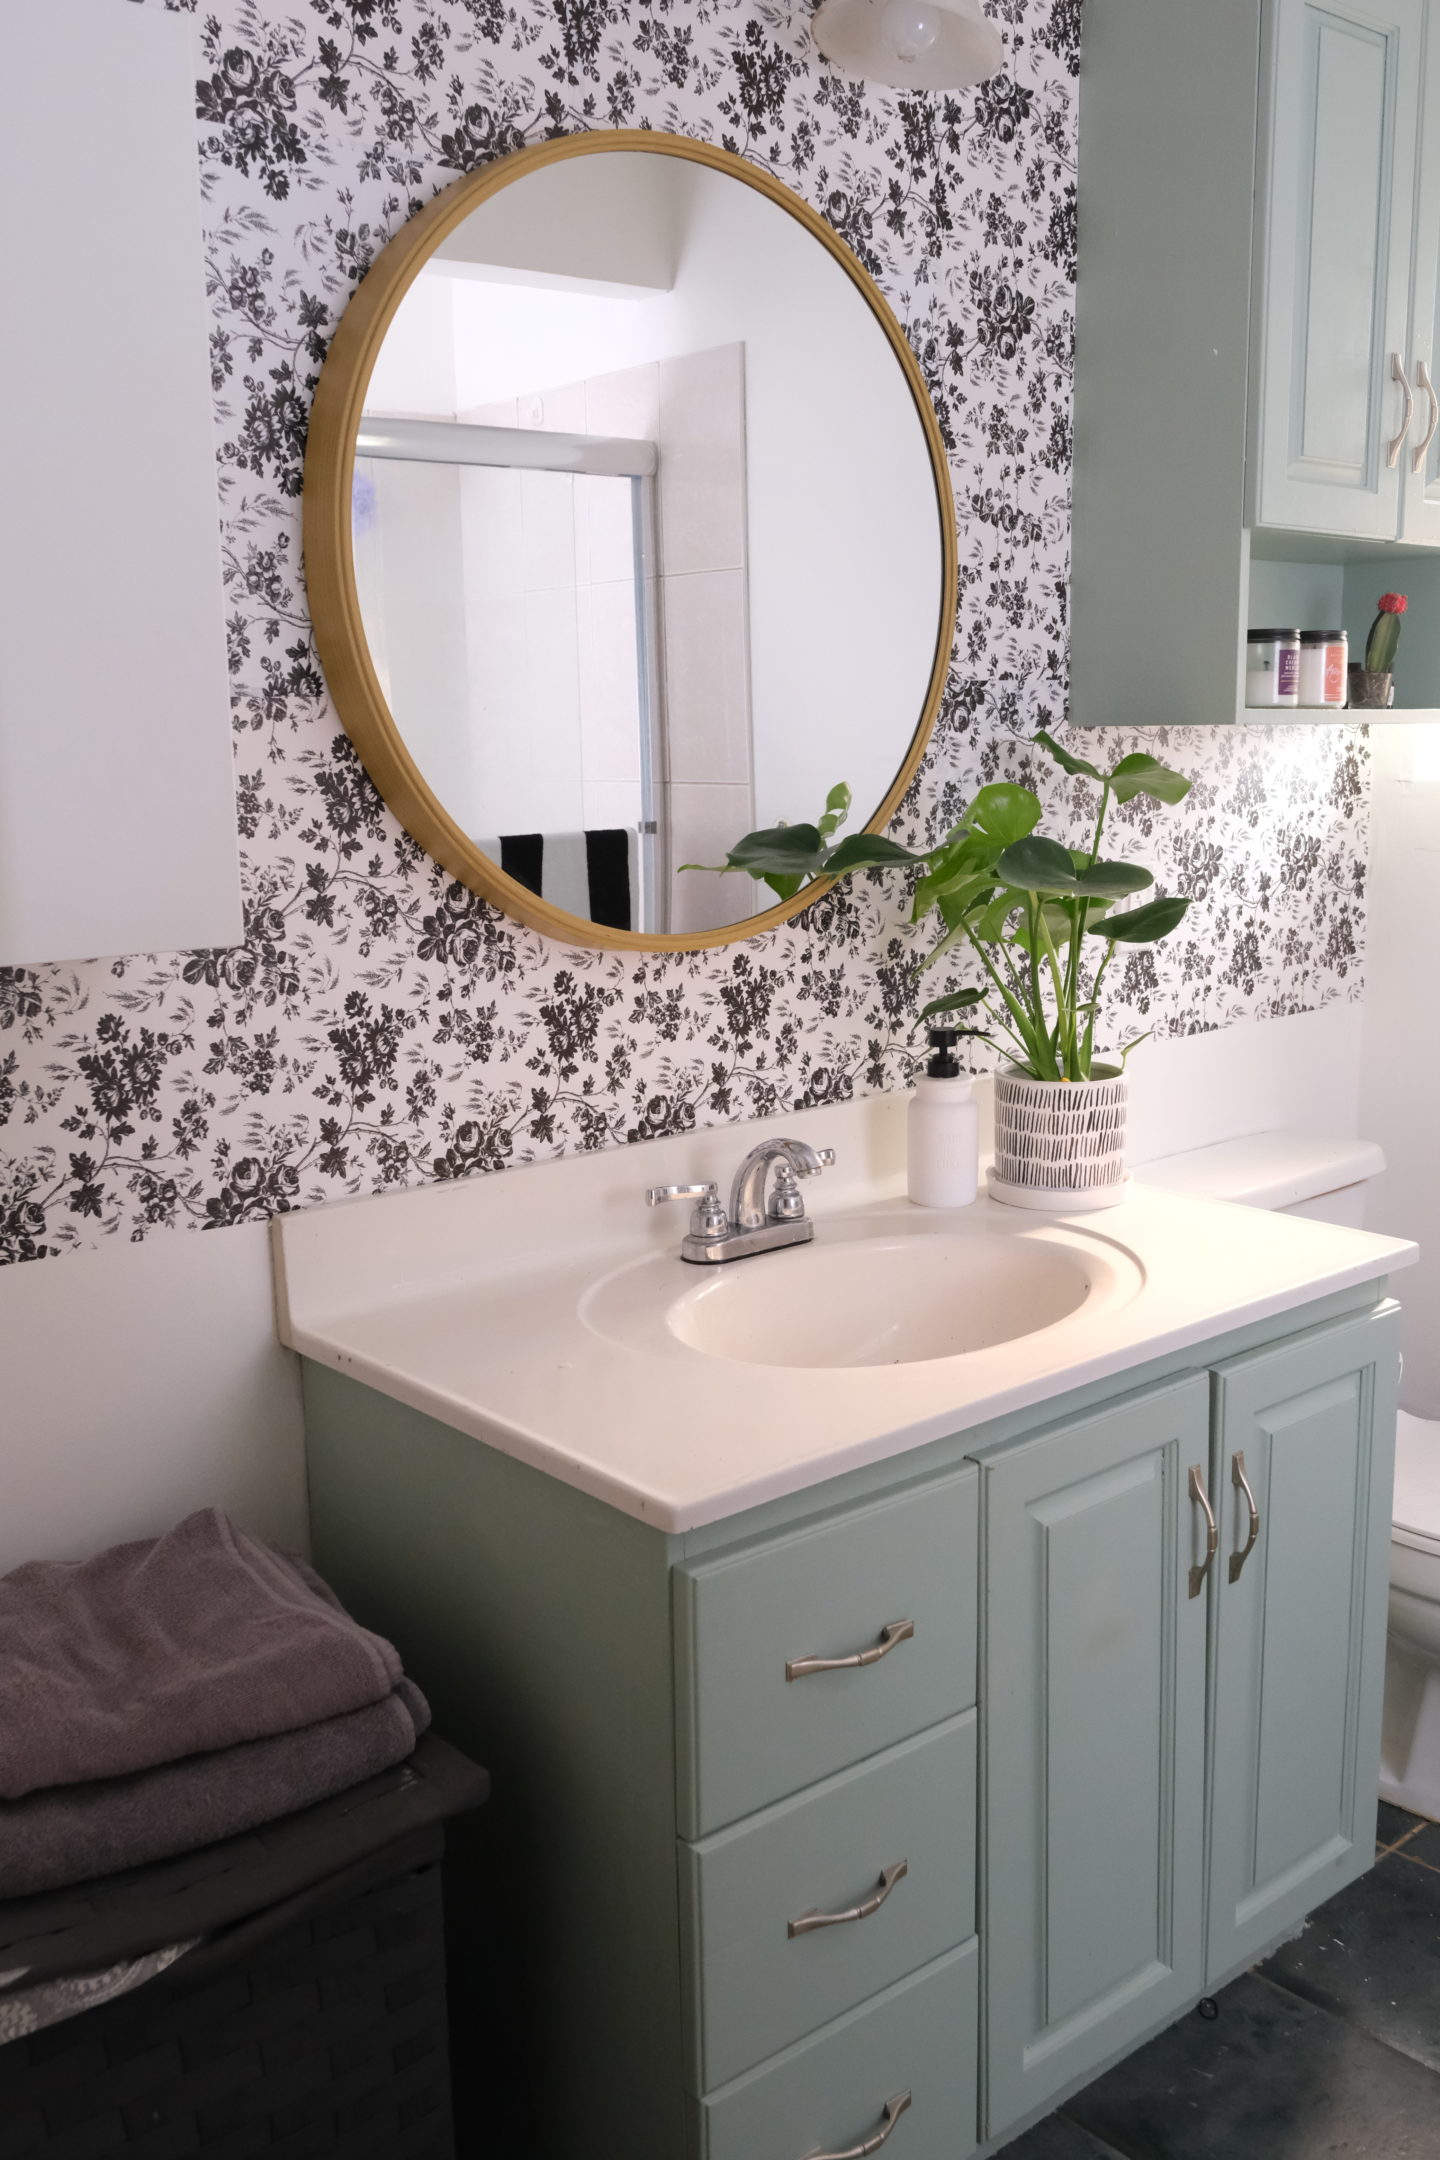 Main Bathroom Makeover (Before & After)